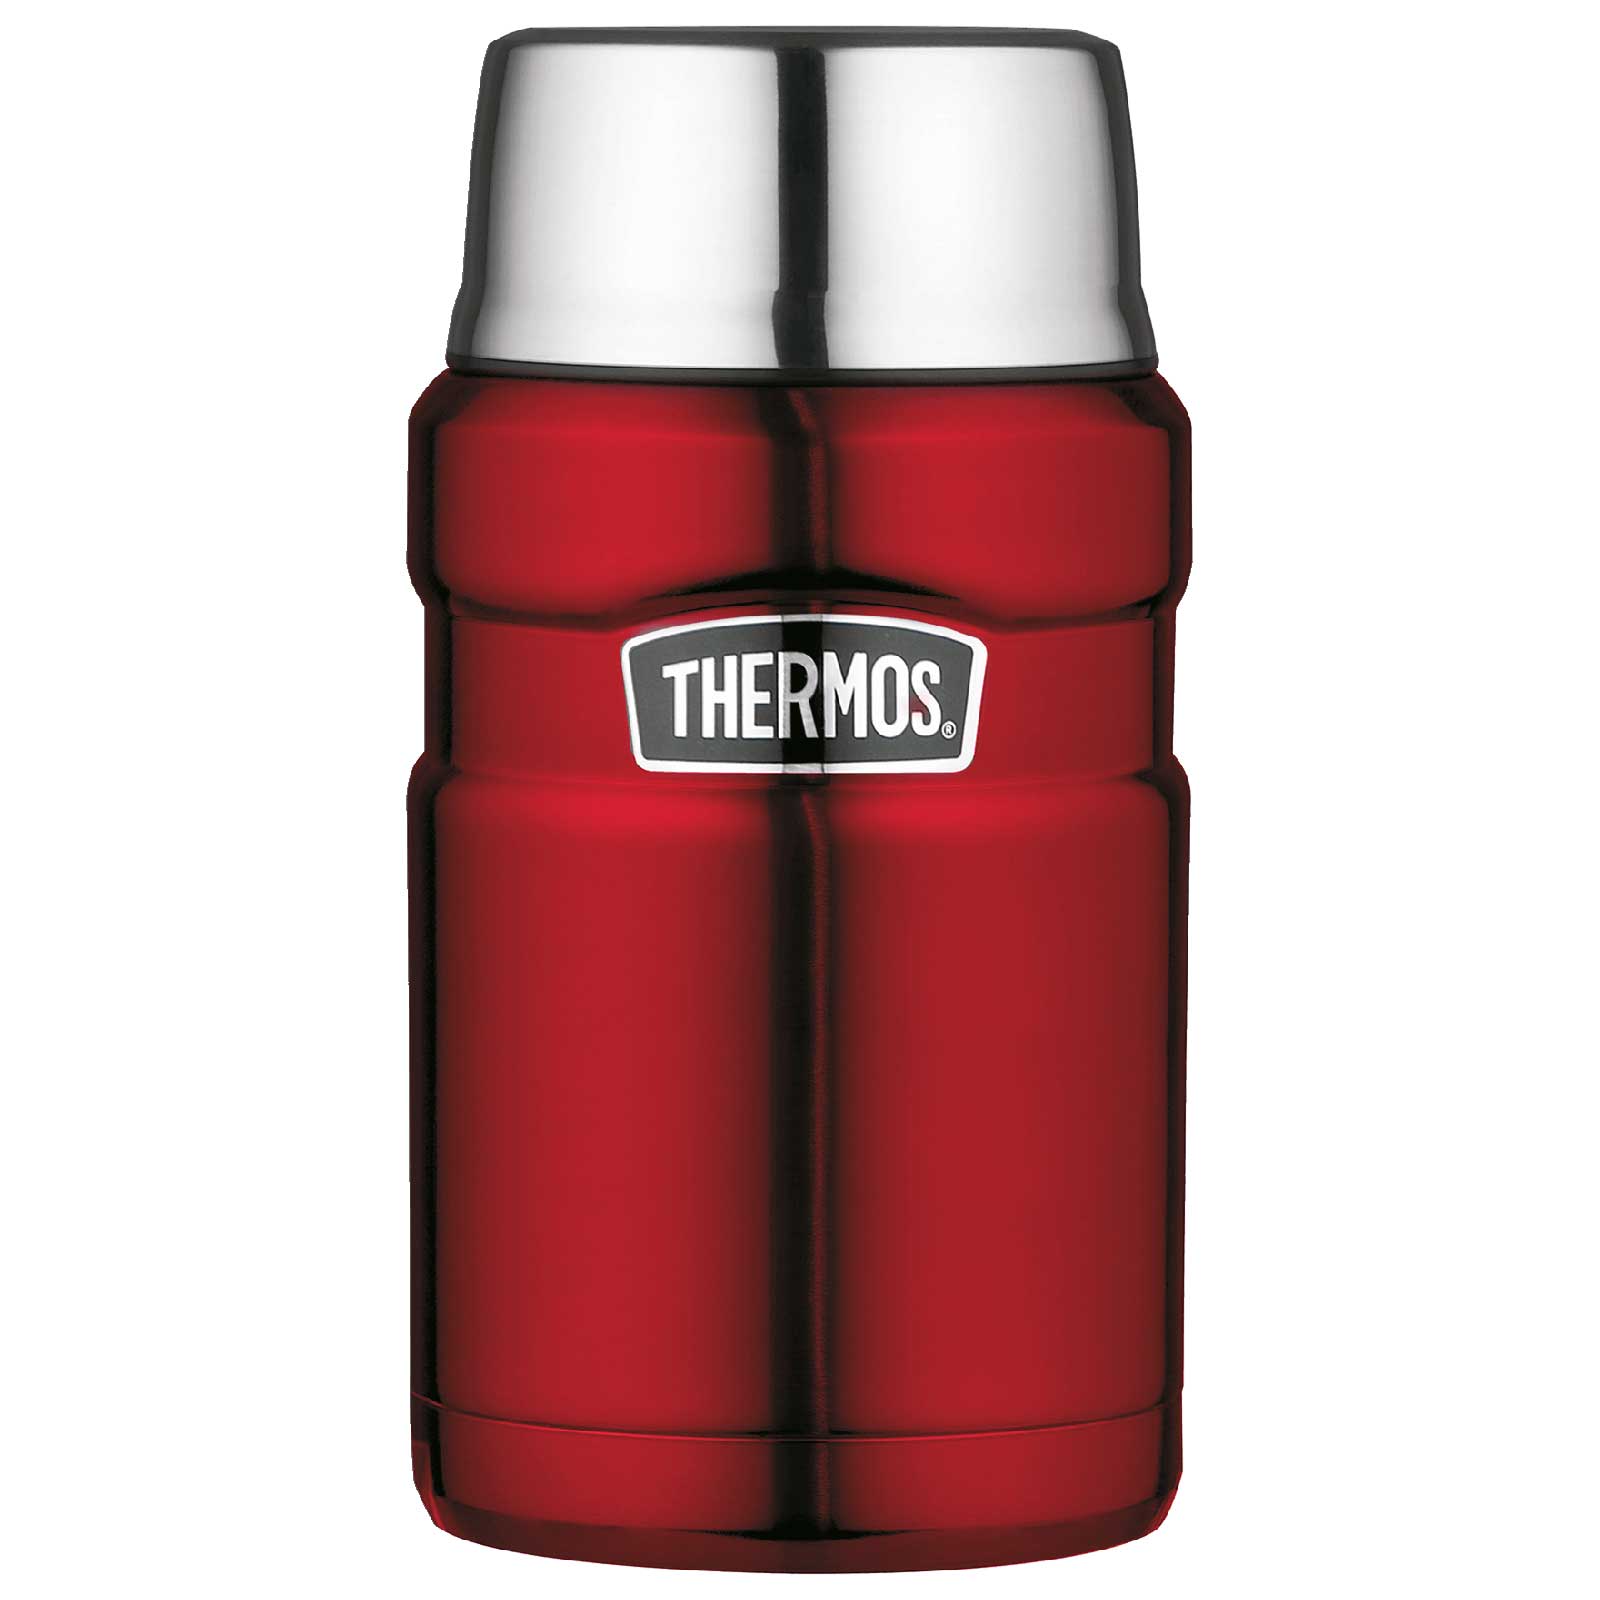 Productfoto van THERMOS® Stainless King Food Jar 0.71L Isolerende Voedselbox - cranberry red polished